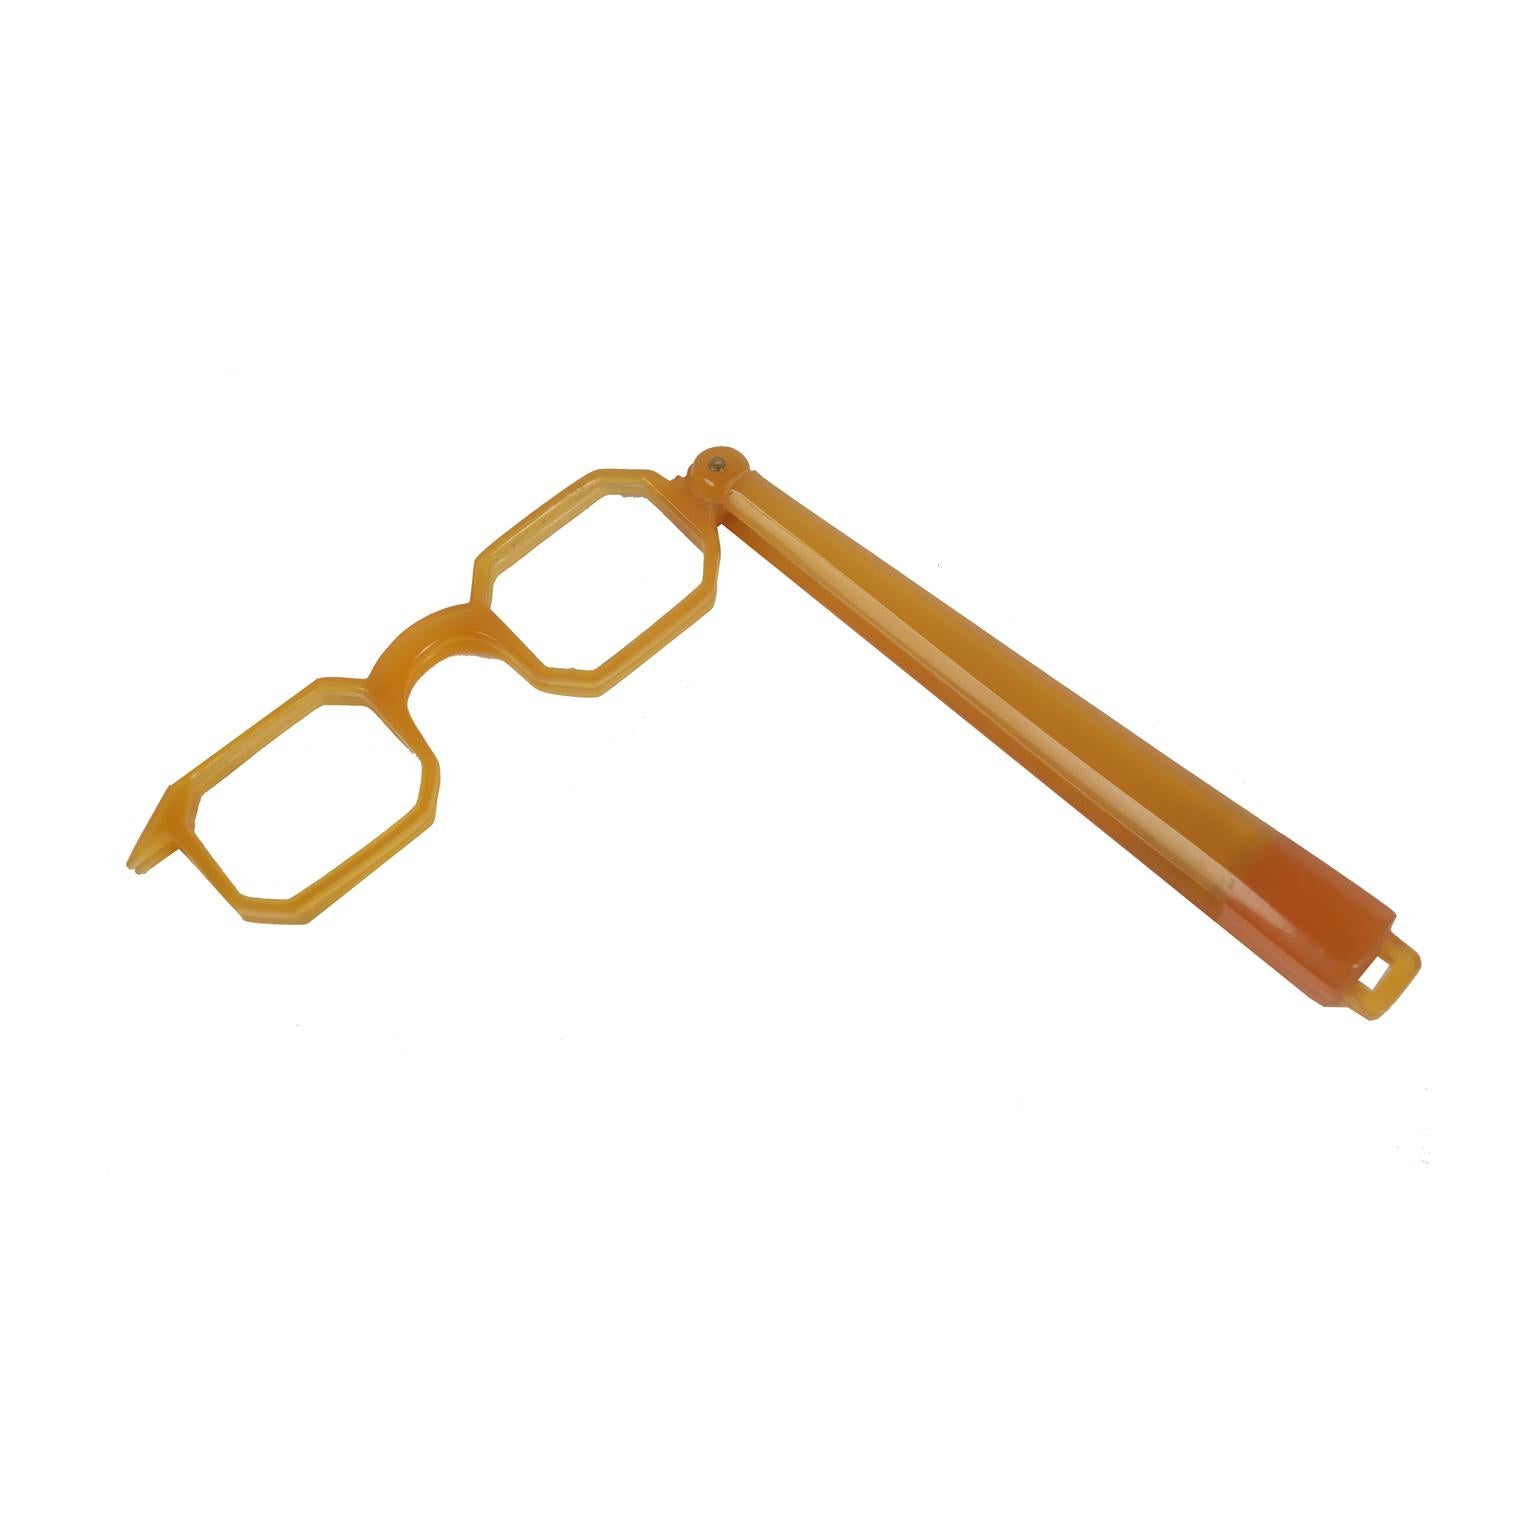 Double fassamano eyeglasses (from the French face-en-main), made with a double articulated eyewear, one with lenses and one without, mounted on the upper part, signed Lugene, made of Bakelite, blonde tortoise colour. Glasses width 10.5 cm, height 3